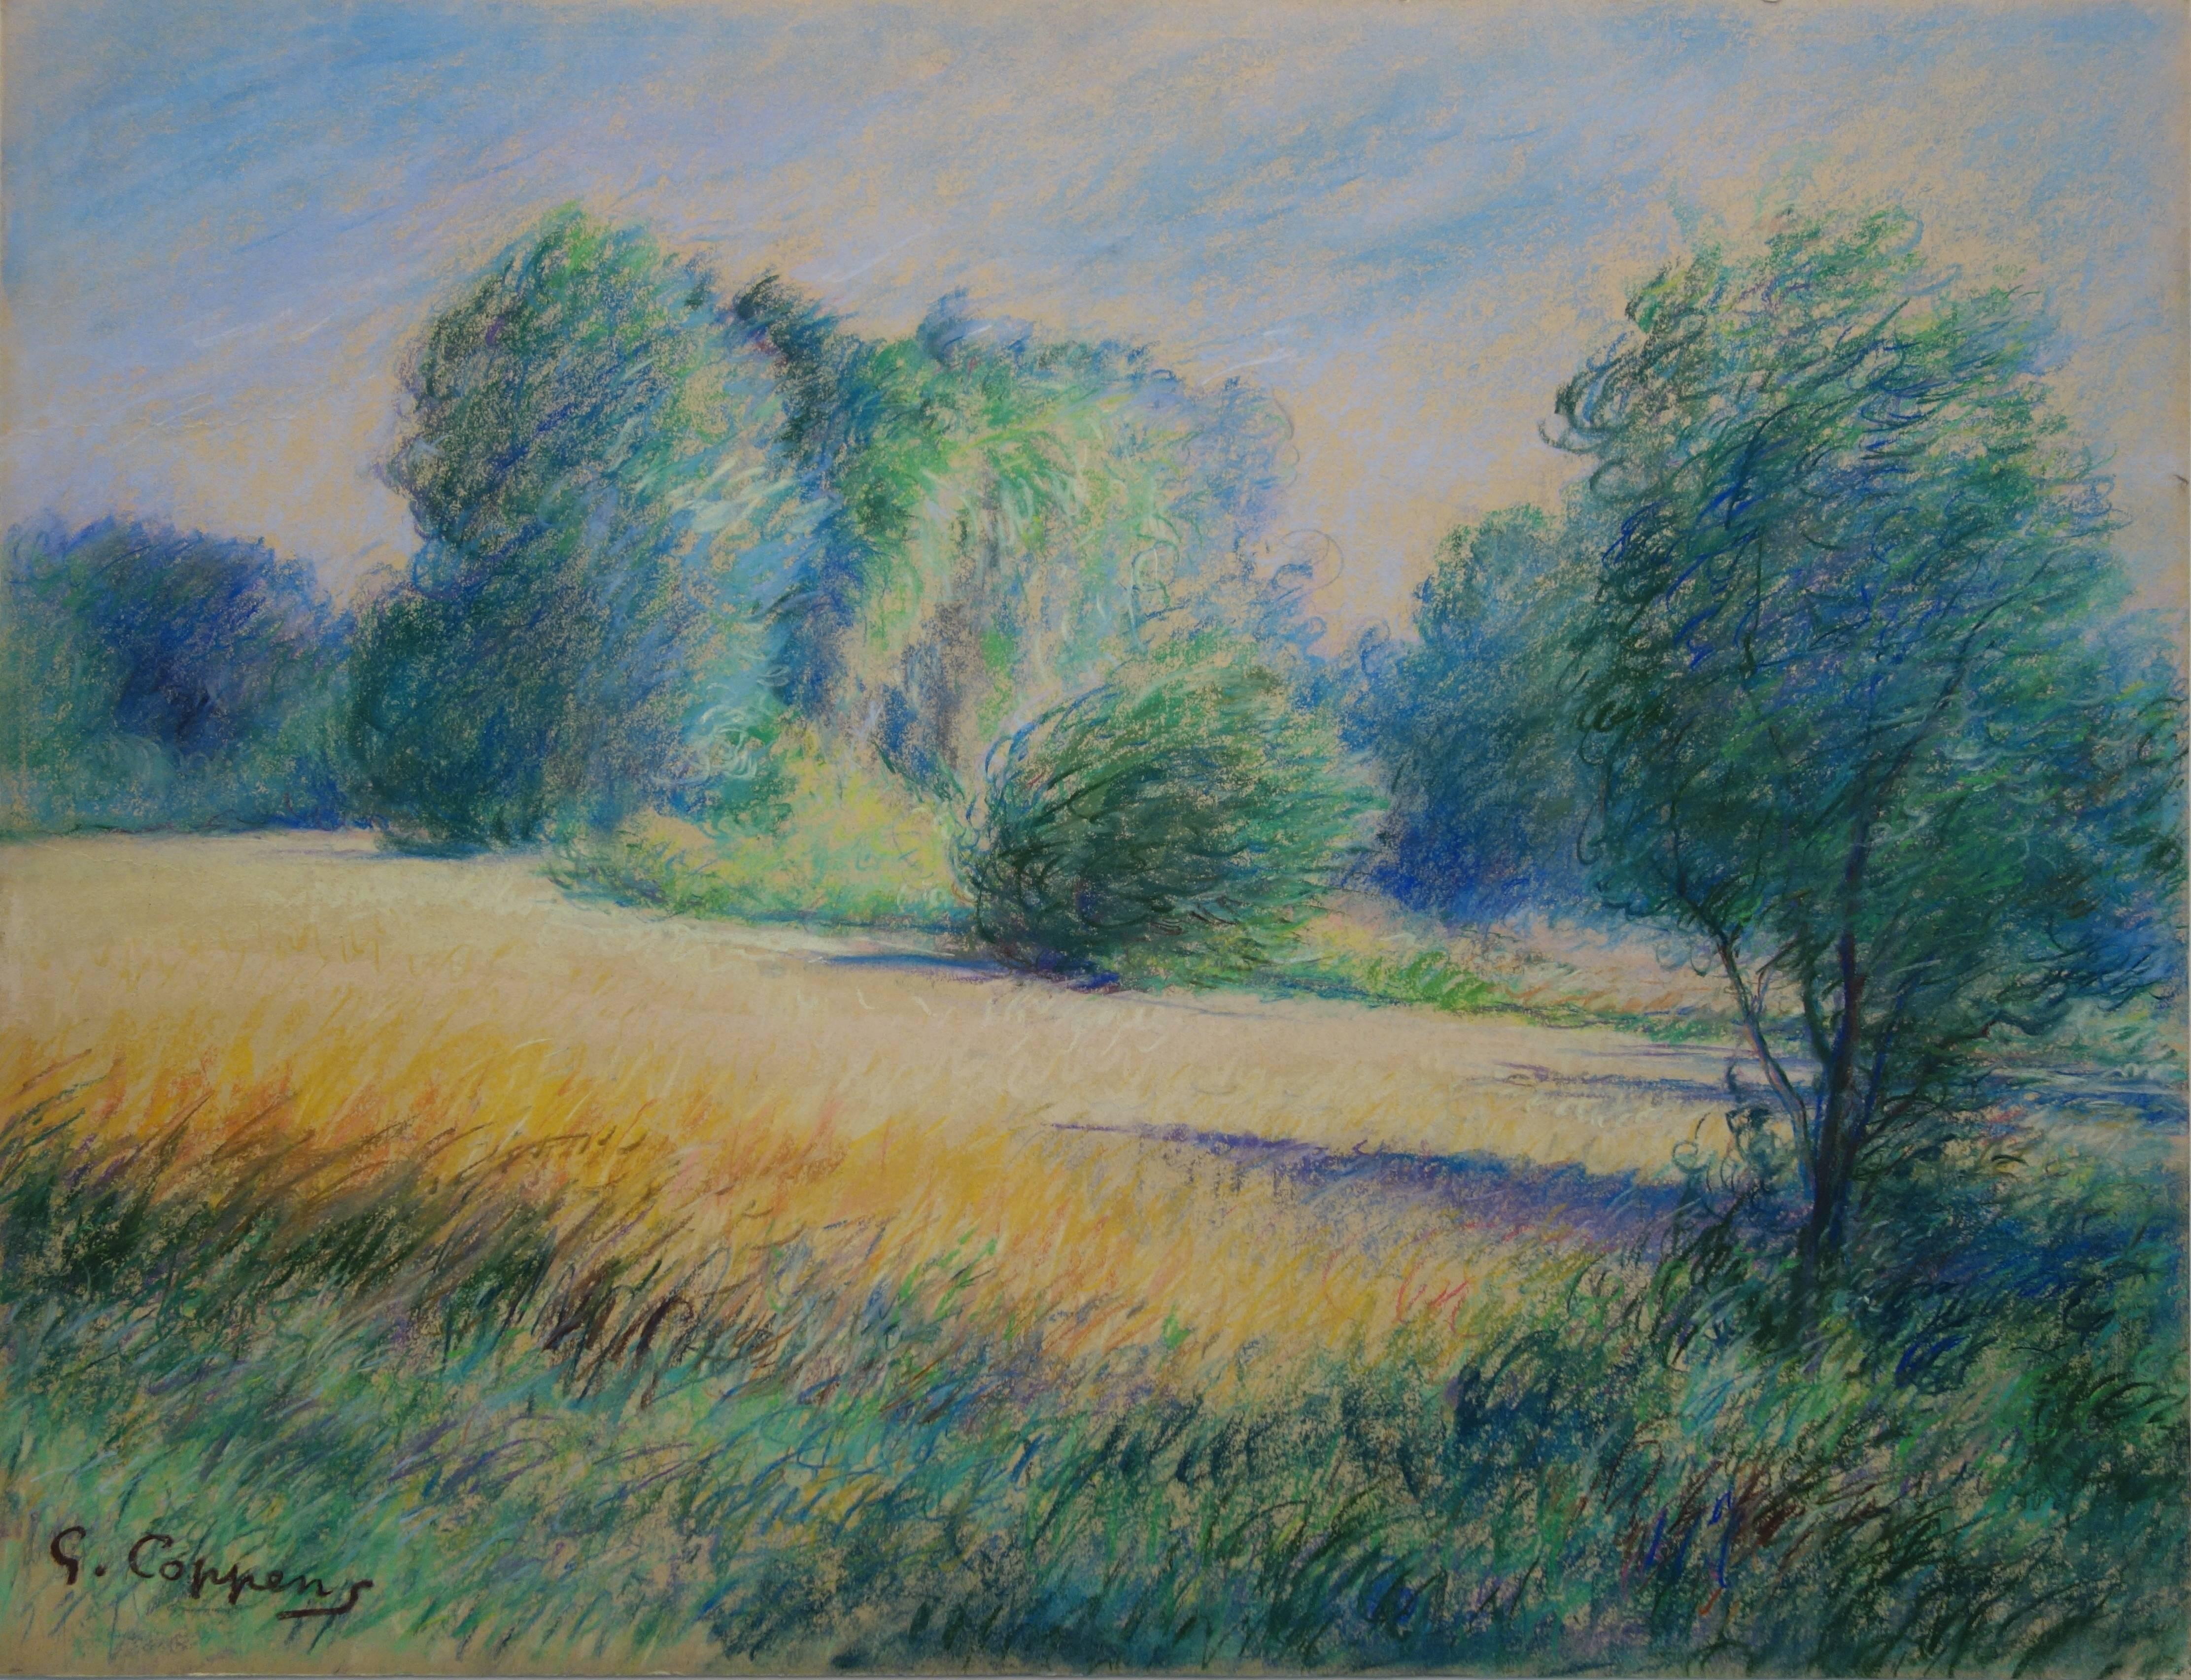 Gaston Coppens Landscape Art - Tribute to Monet : Impressionist Countryside - Original charcoal drawing, Signed